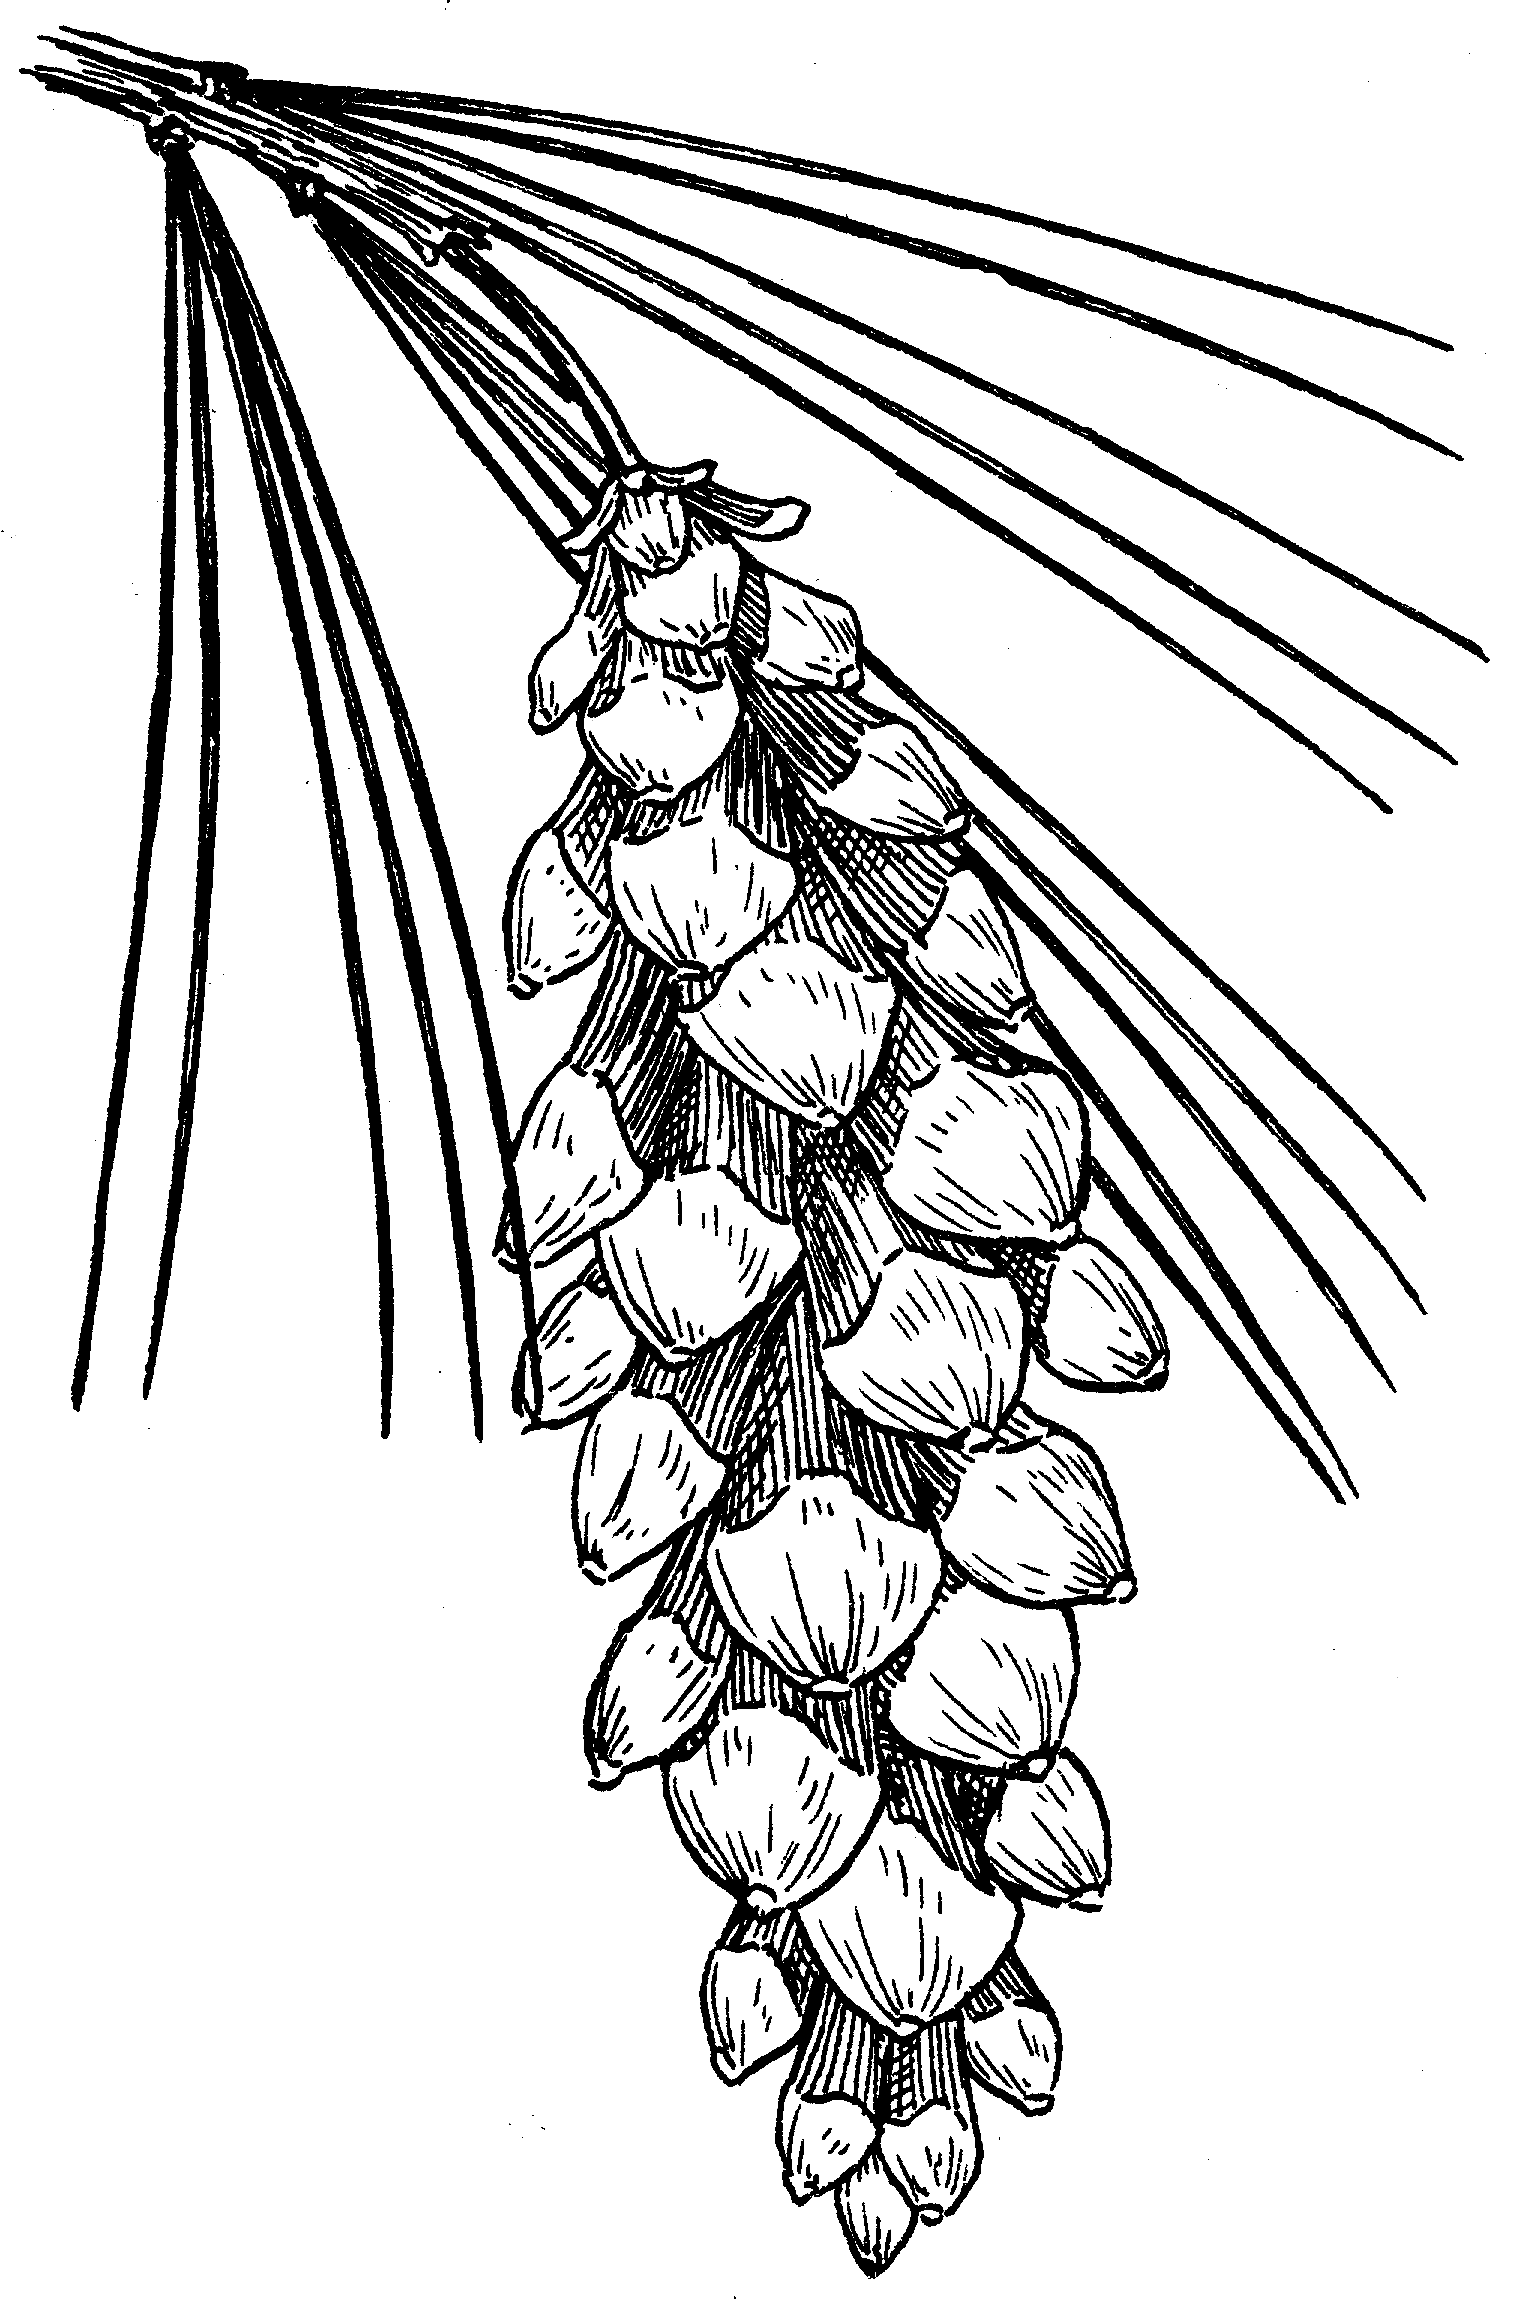 Pine Cone Drawing at GetDrawings.com | Free for personal use Pine Cone